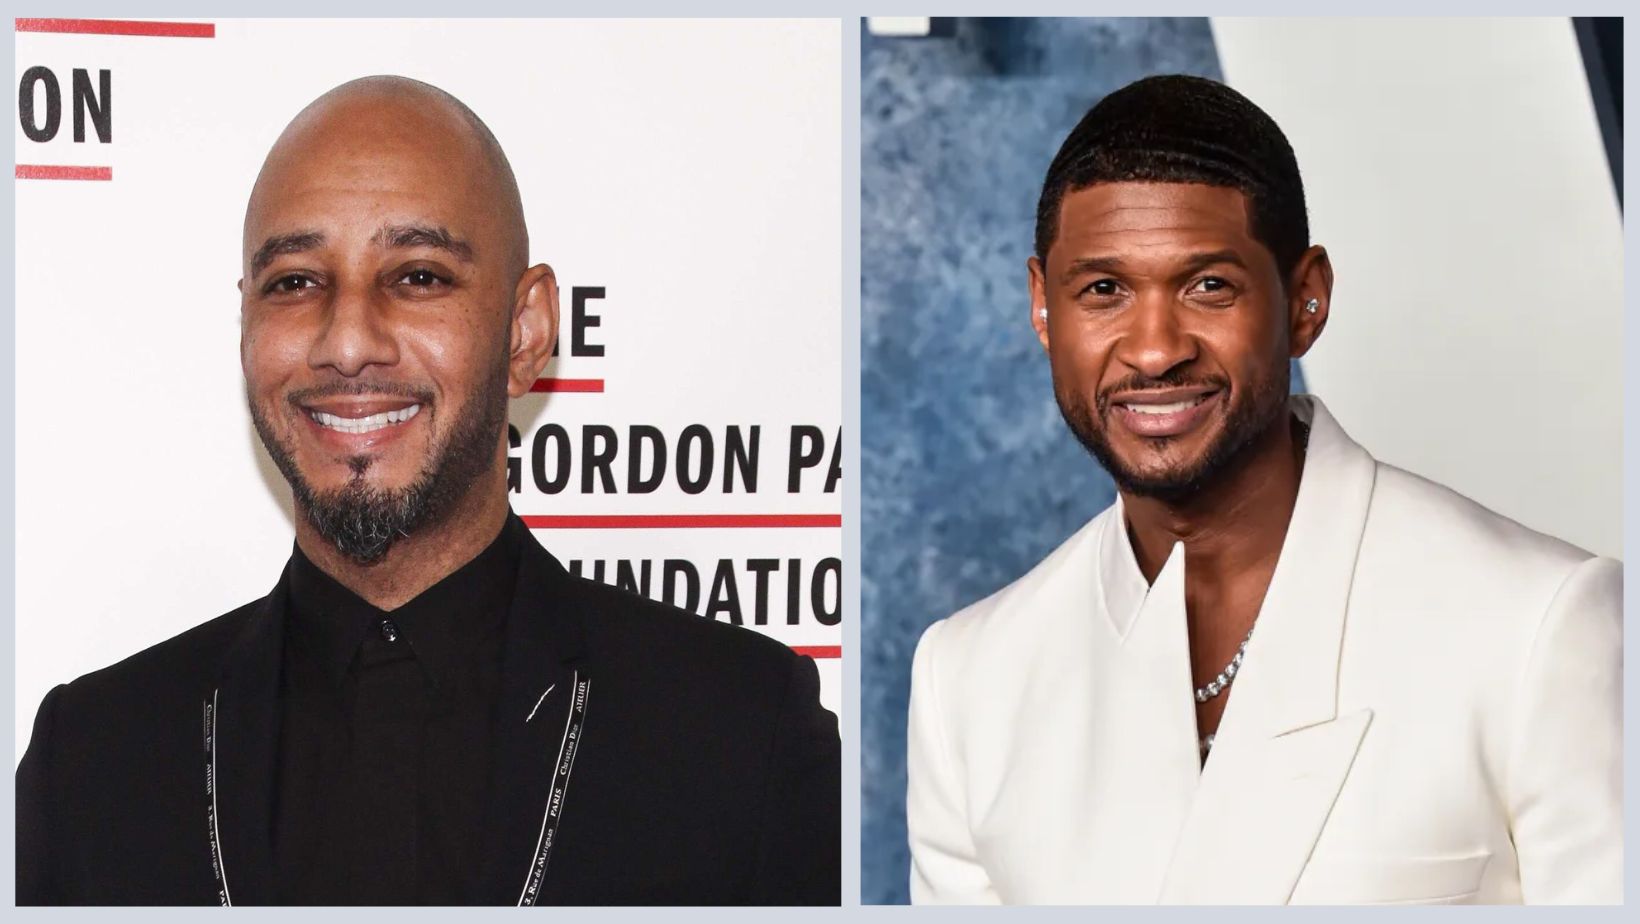 What Is Swizz Beatz Beef With Usher About?